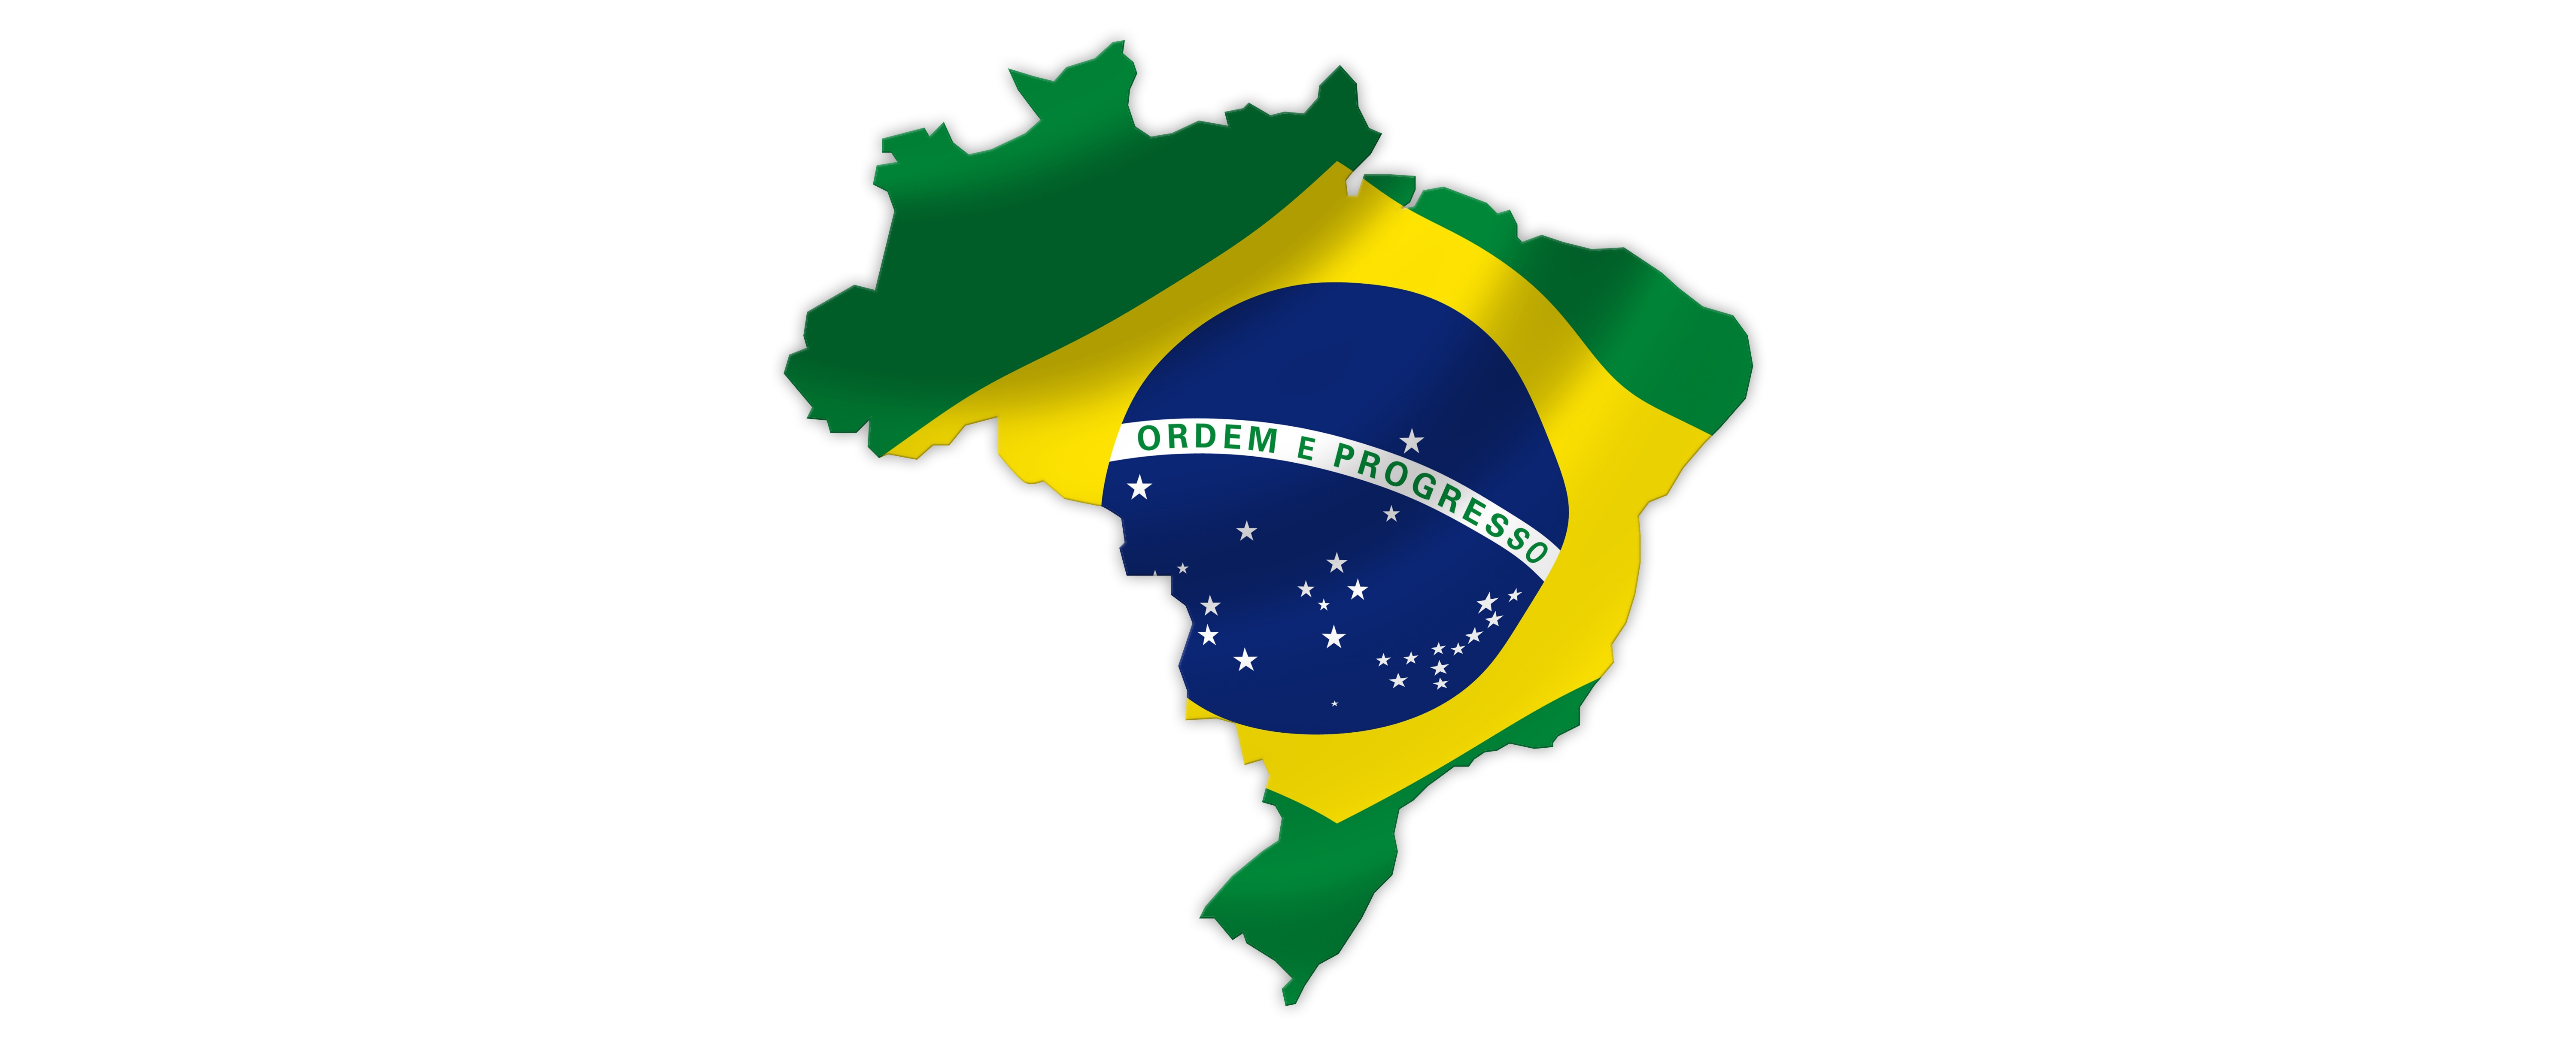 Are Cities Constituent Units in Brazil’s Federalism?